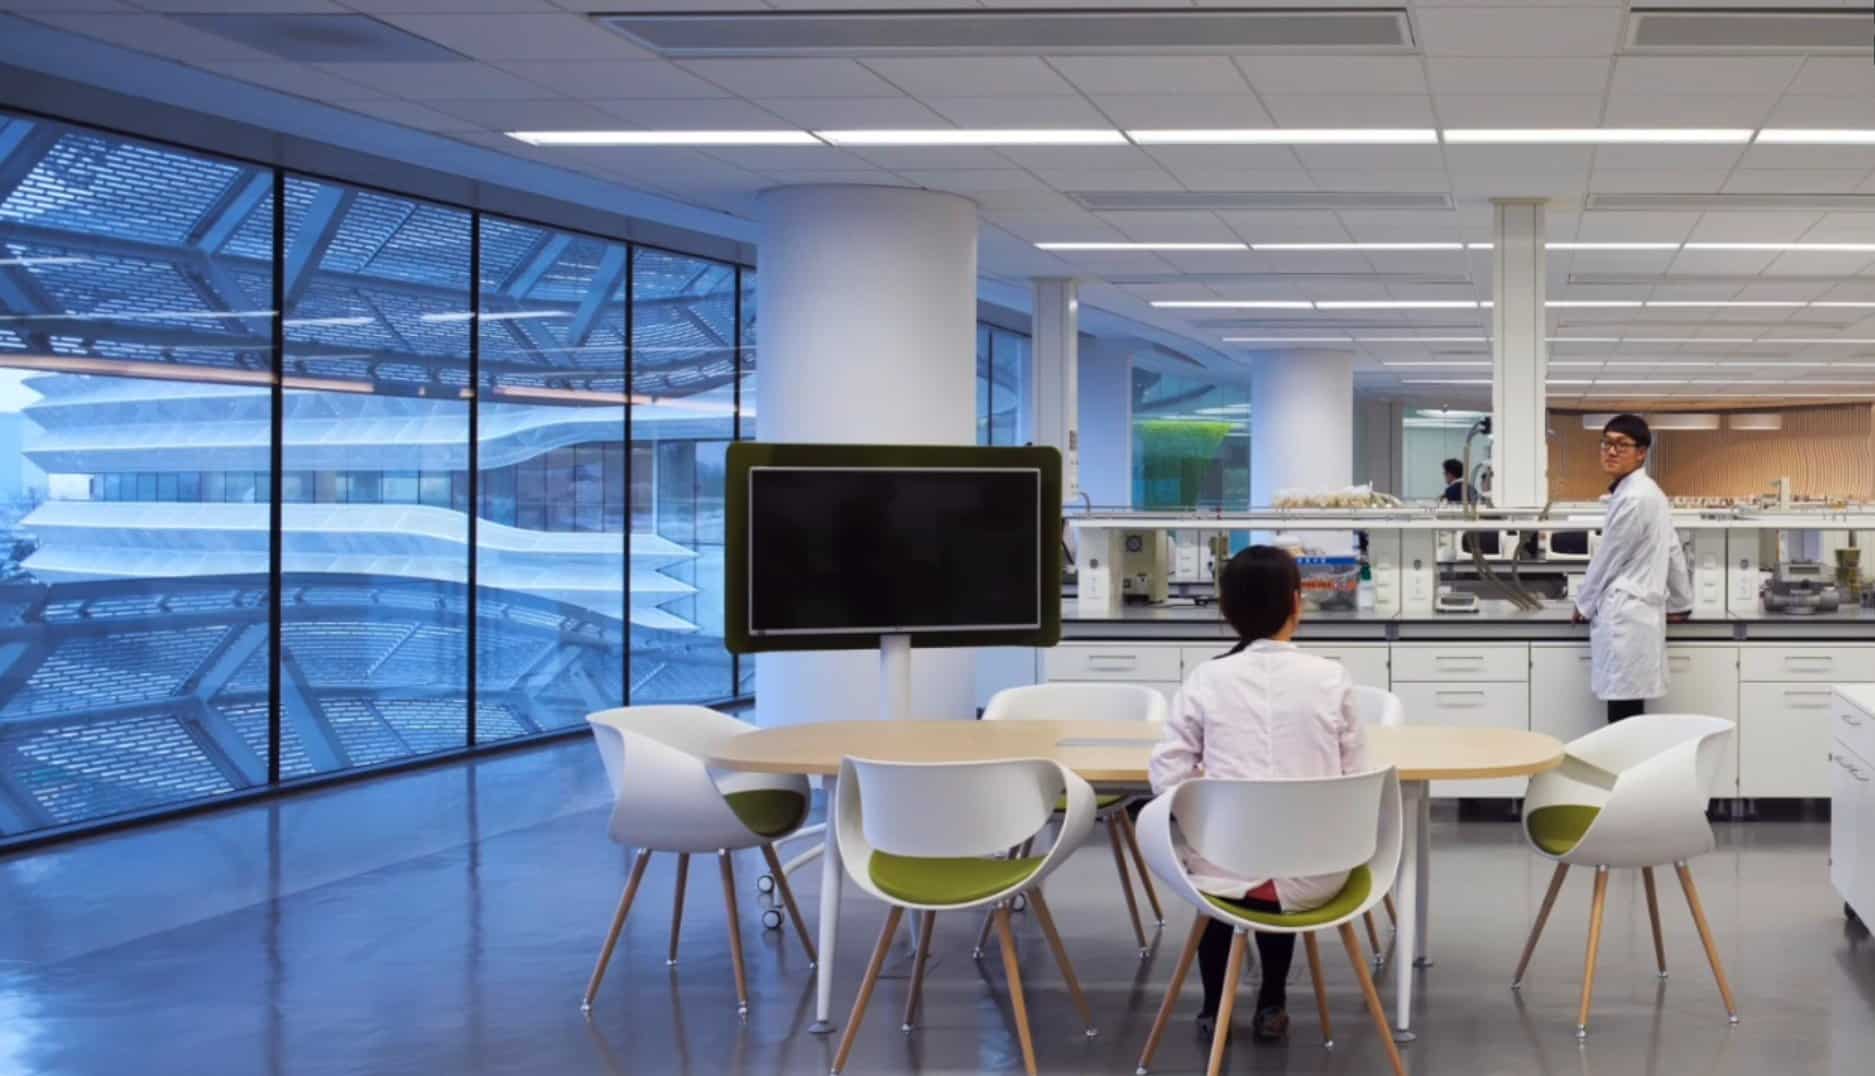 Are Successful Lab Designs Copying Flexible Office Trends? Formaspace